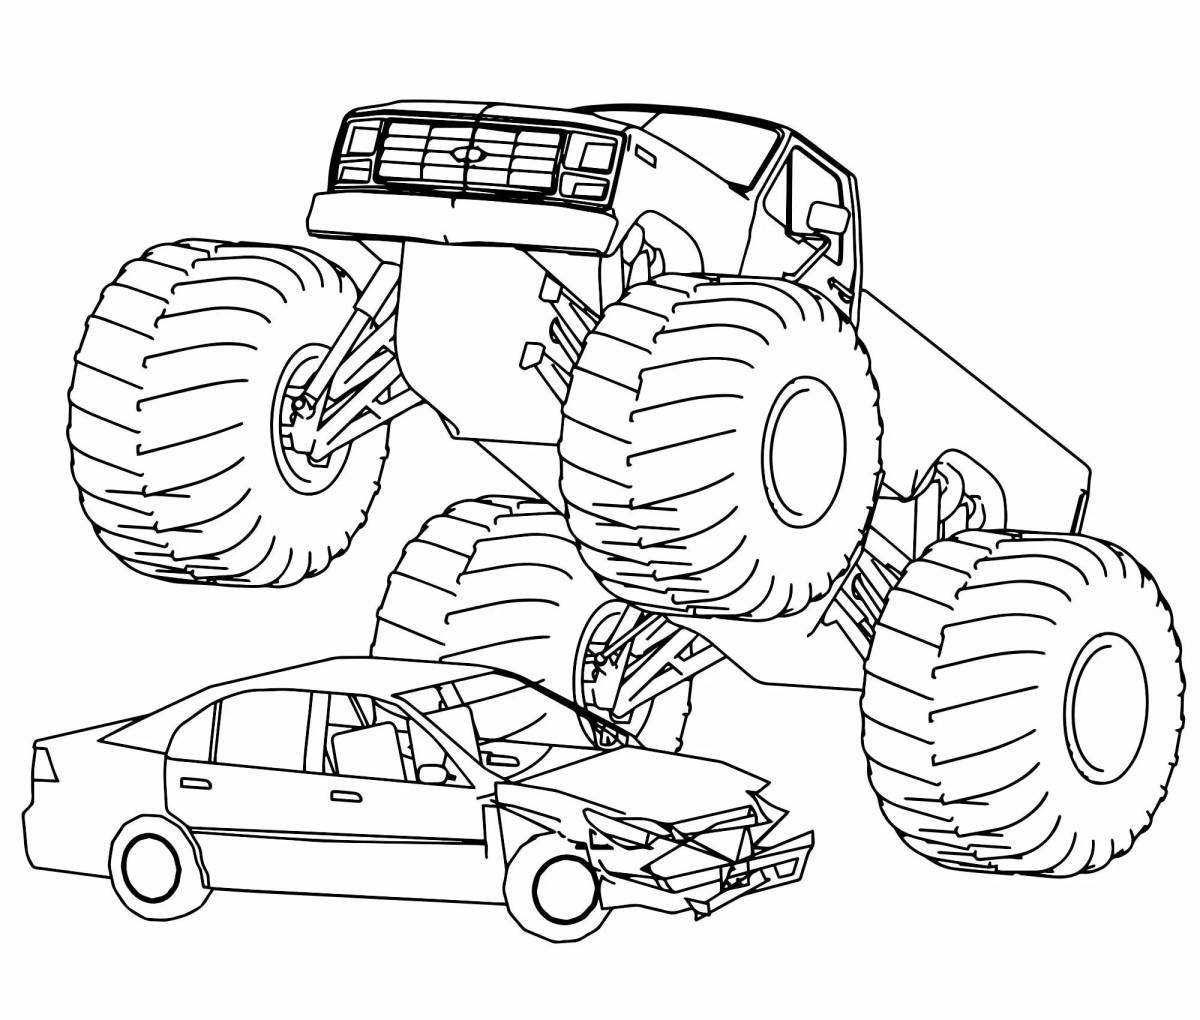 Fantastic monster truck coloring page for kids